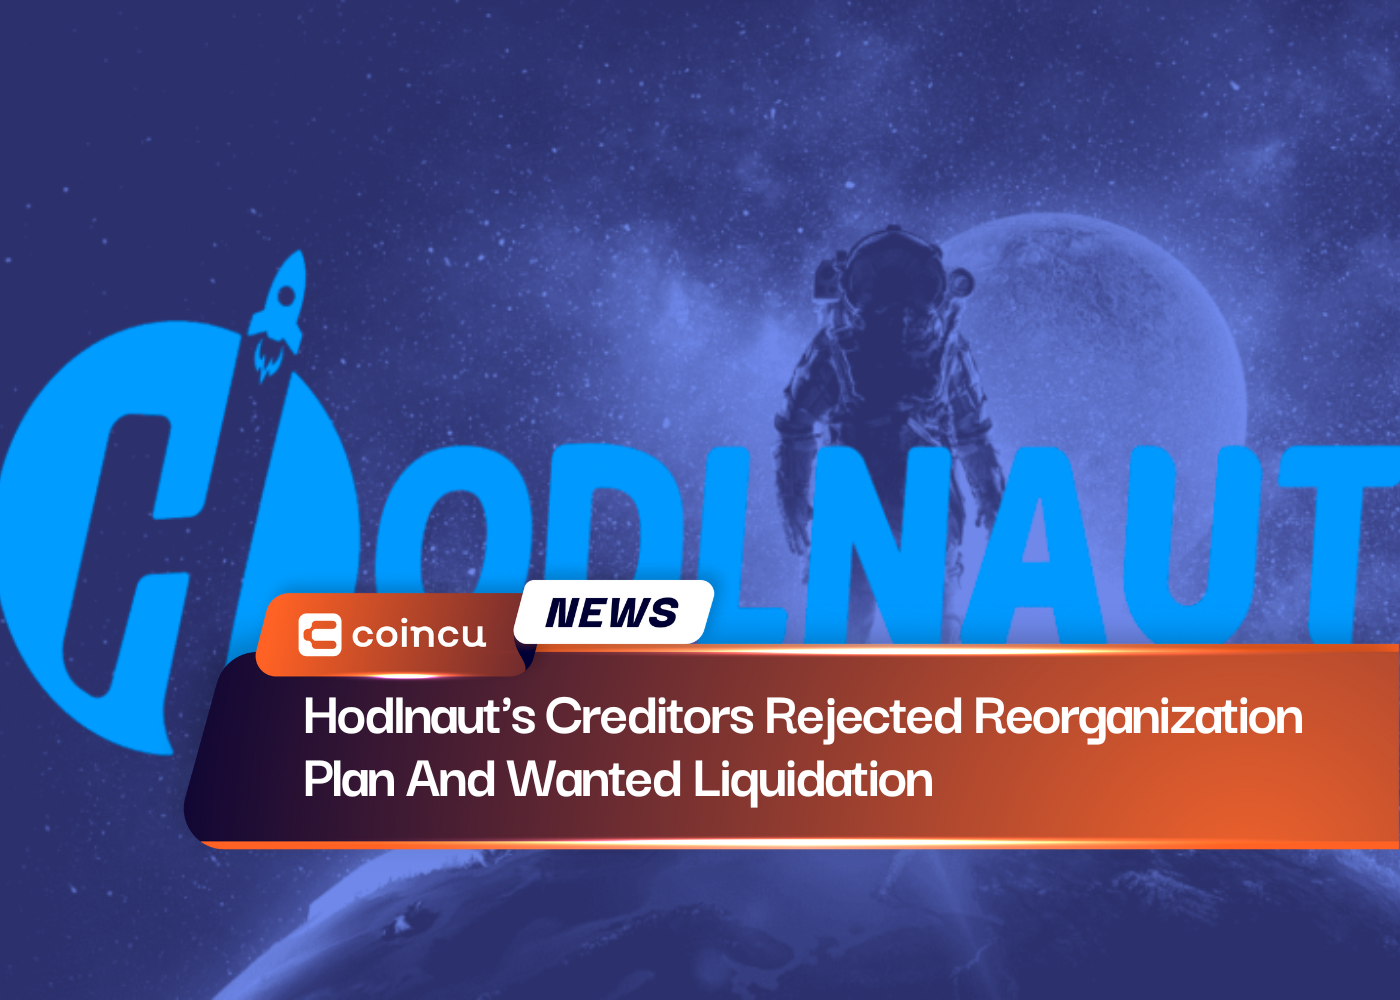 Hodlnaut's Creditors Rejected Reorganization Plan And Wanted Liquidation